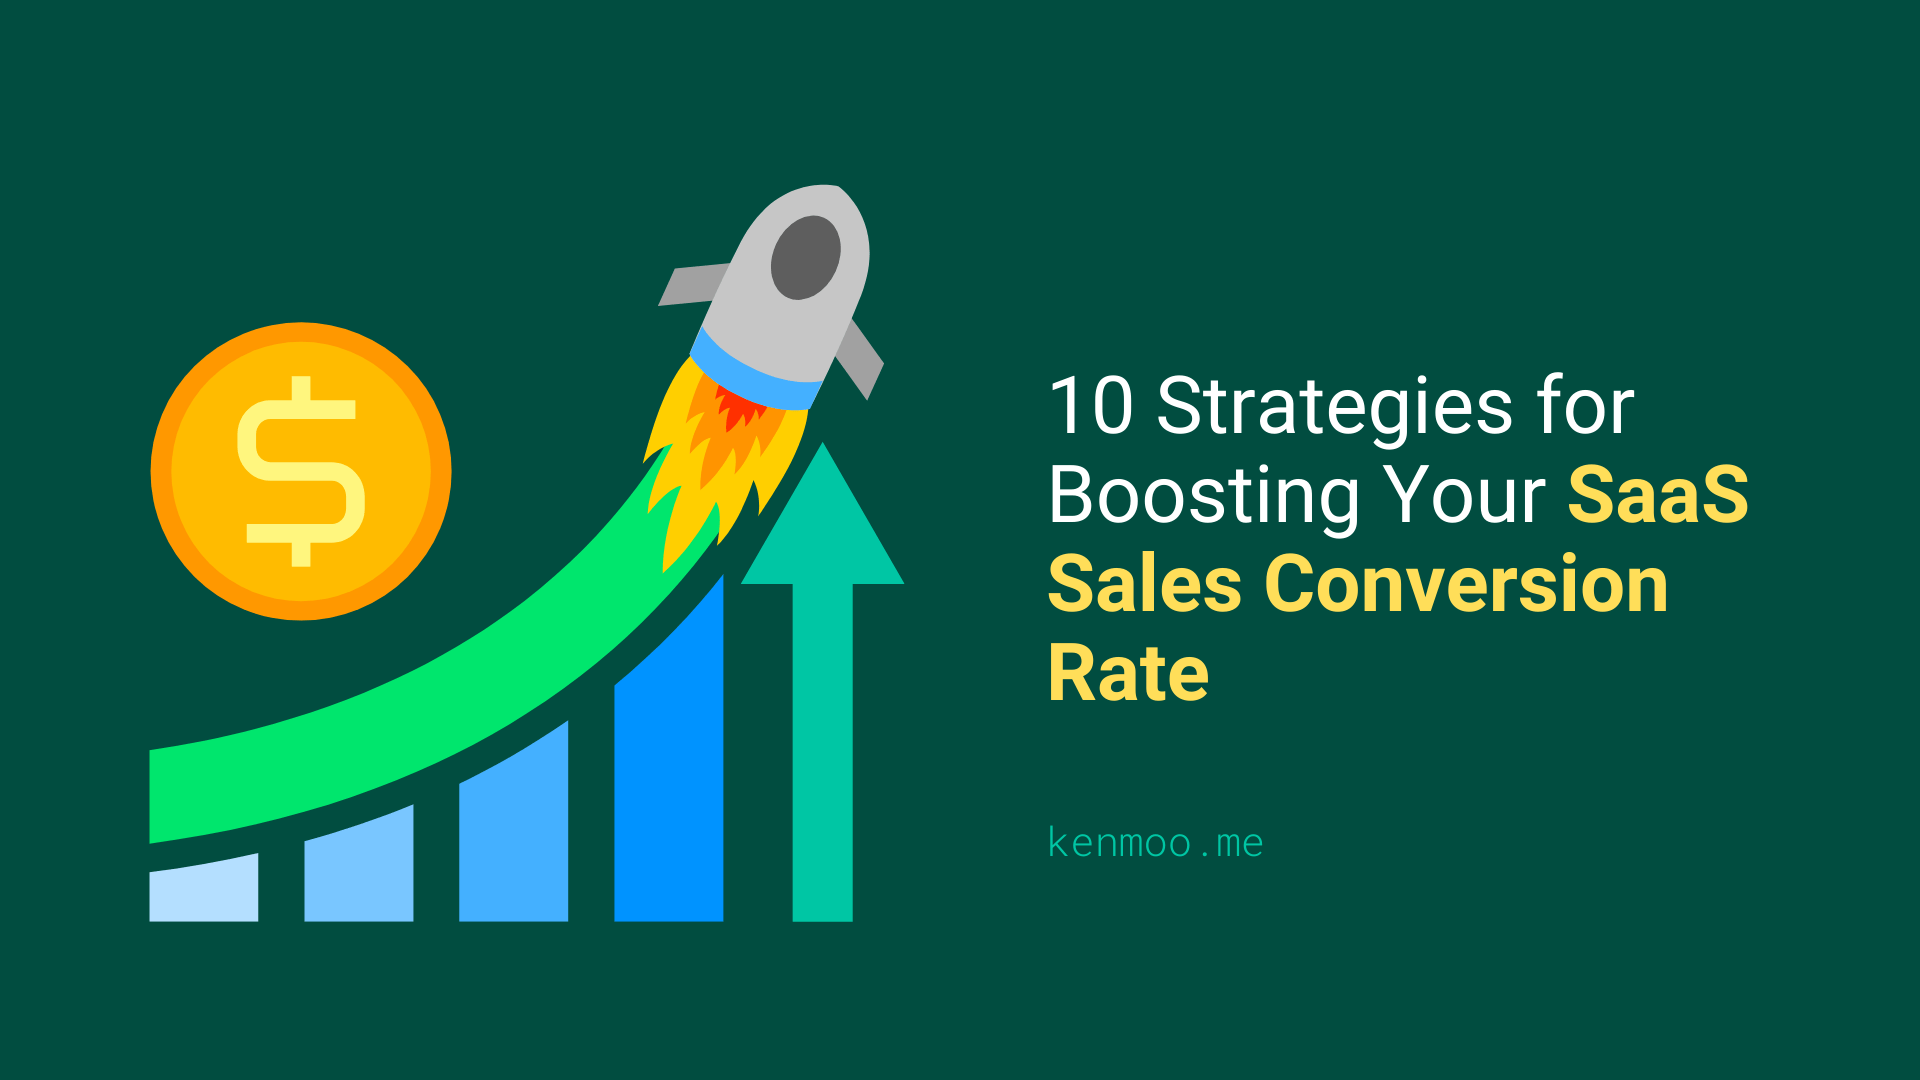 10 Strategies for Boosting Your SaaS Sales Conversion Rate